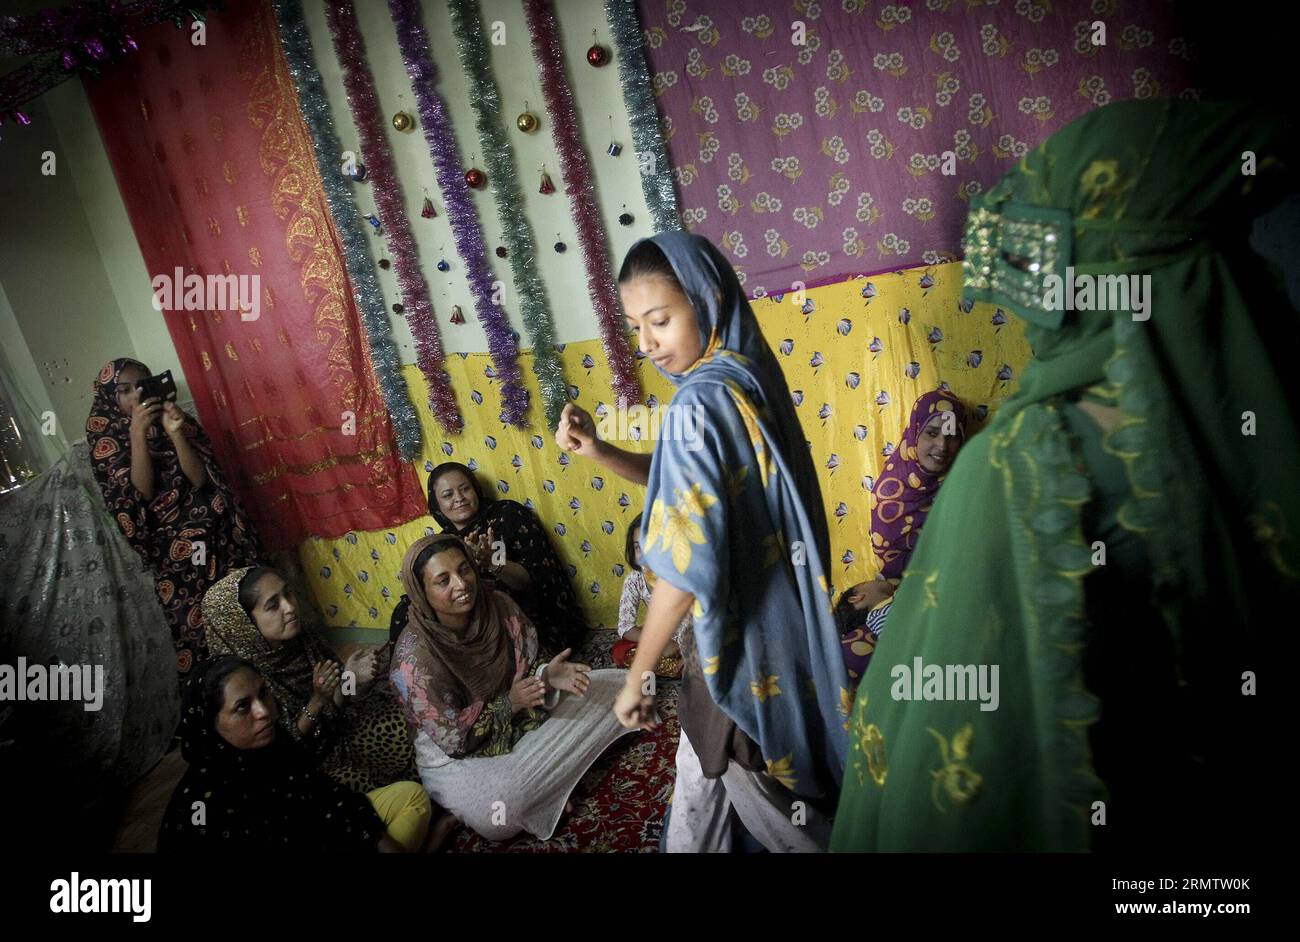 (140919) -- HORMOZ ISLAND, Sept. 19, 2014 -- Iranian women dance during a wedding ceremony on the Hormoz Island in south Iran, Sept. 19, 2014. ) IRAN-HORMOZ ISLAND-DAILY LIFE AhmadxHalabisaz PUBLICATIONxNOTxINxCHN   Hormoz Iceland Sept 19 2014 Iranian Women Dance during a Wedding Ceremony ON The Hormoz Iceland in South Iran Sept 19 2014 Iran Hormoz Iceland Daily Life AhmadxHalabisaz PUBLICATIONxNOTxINxCHN Stock Photo